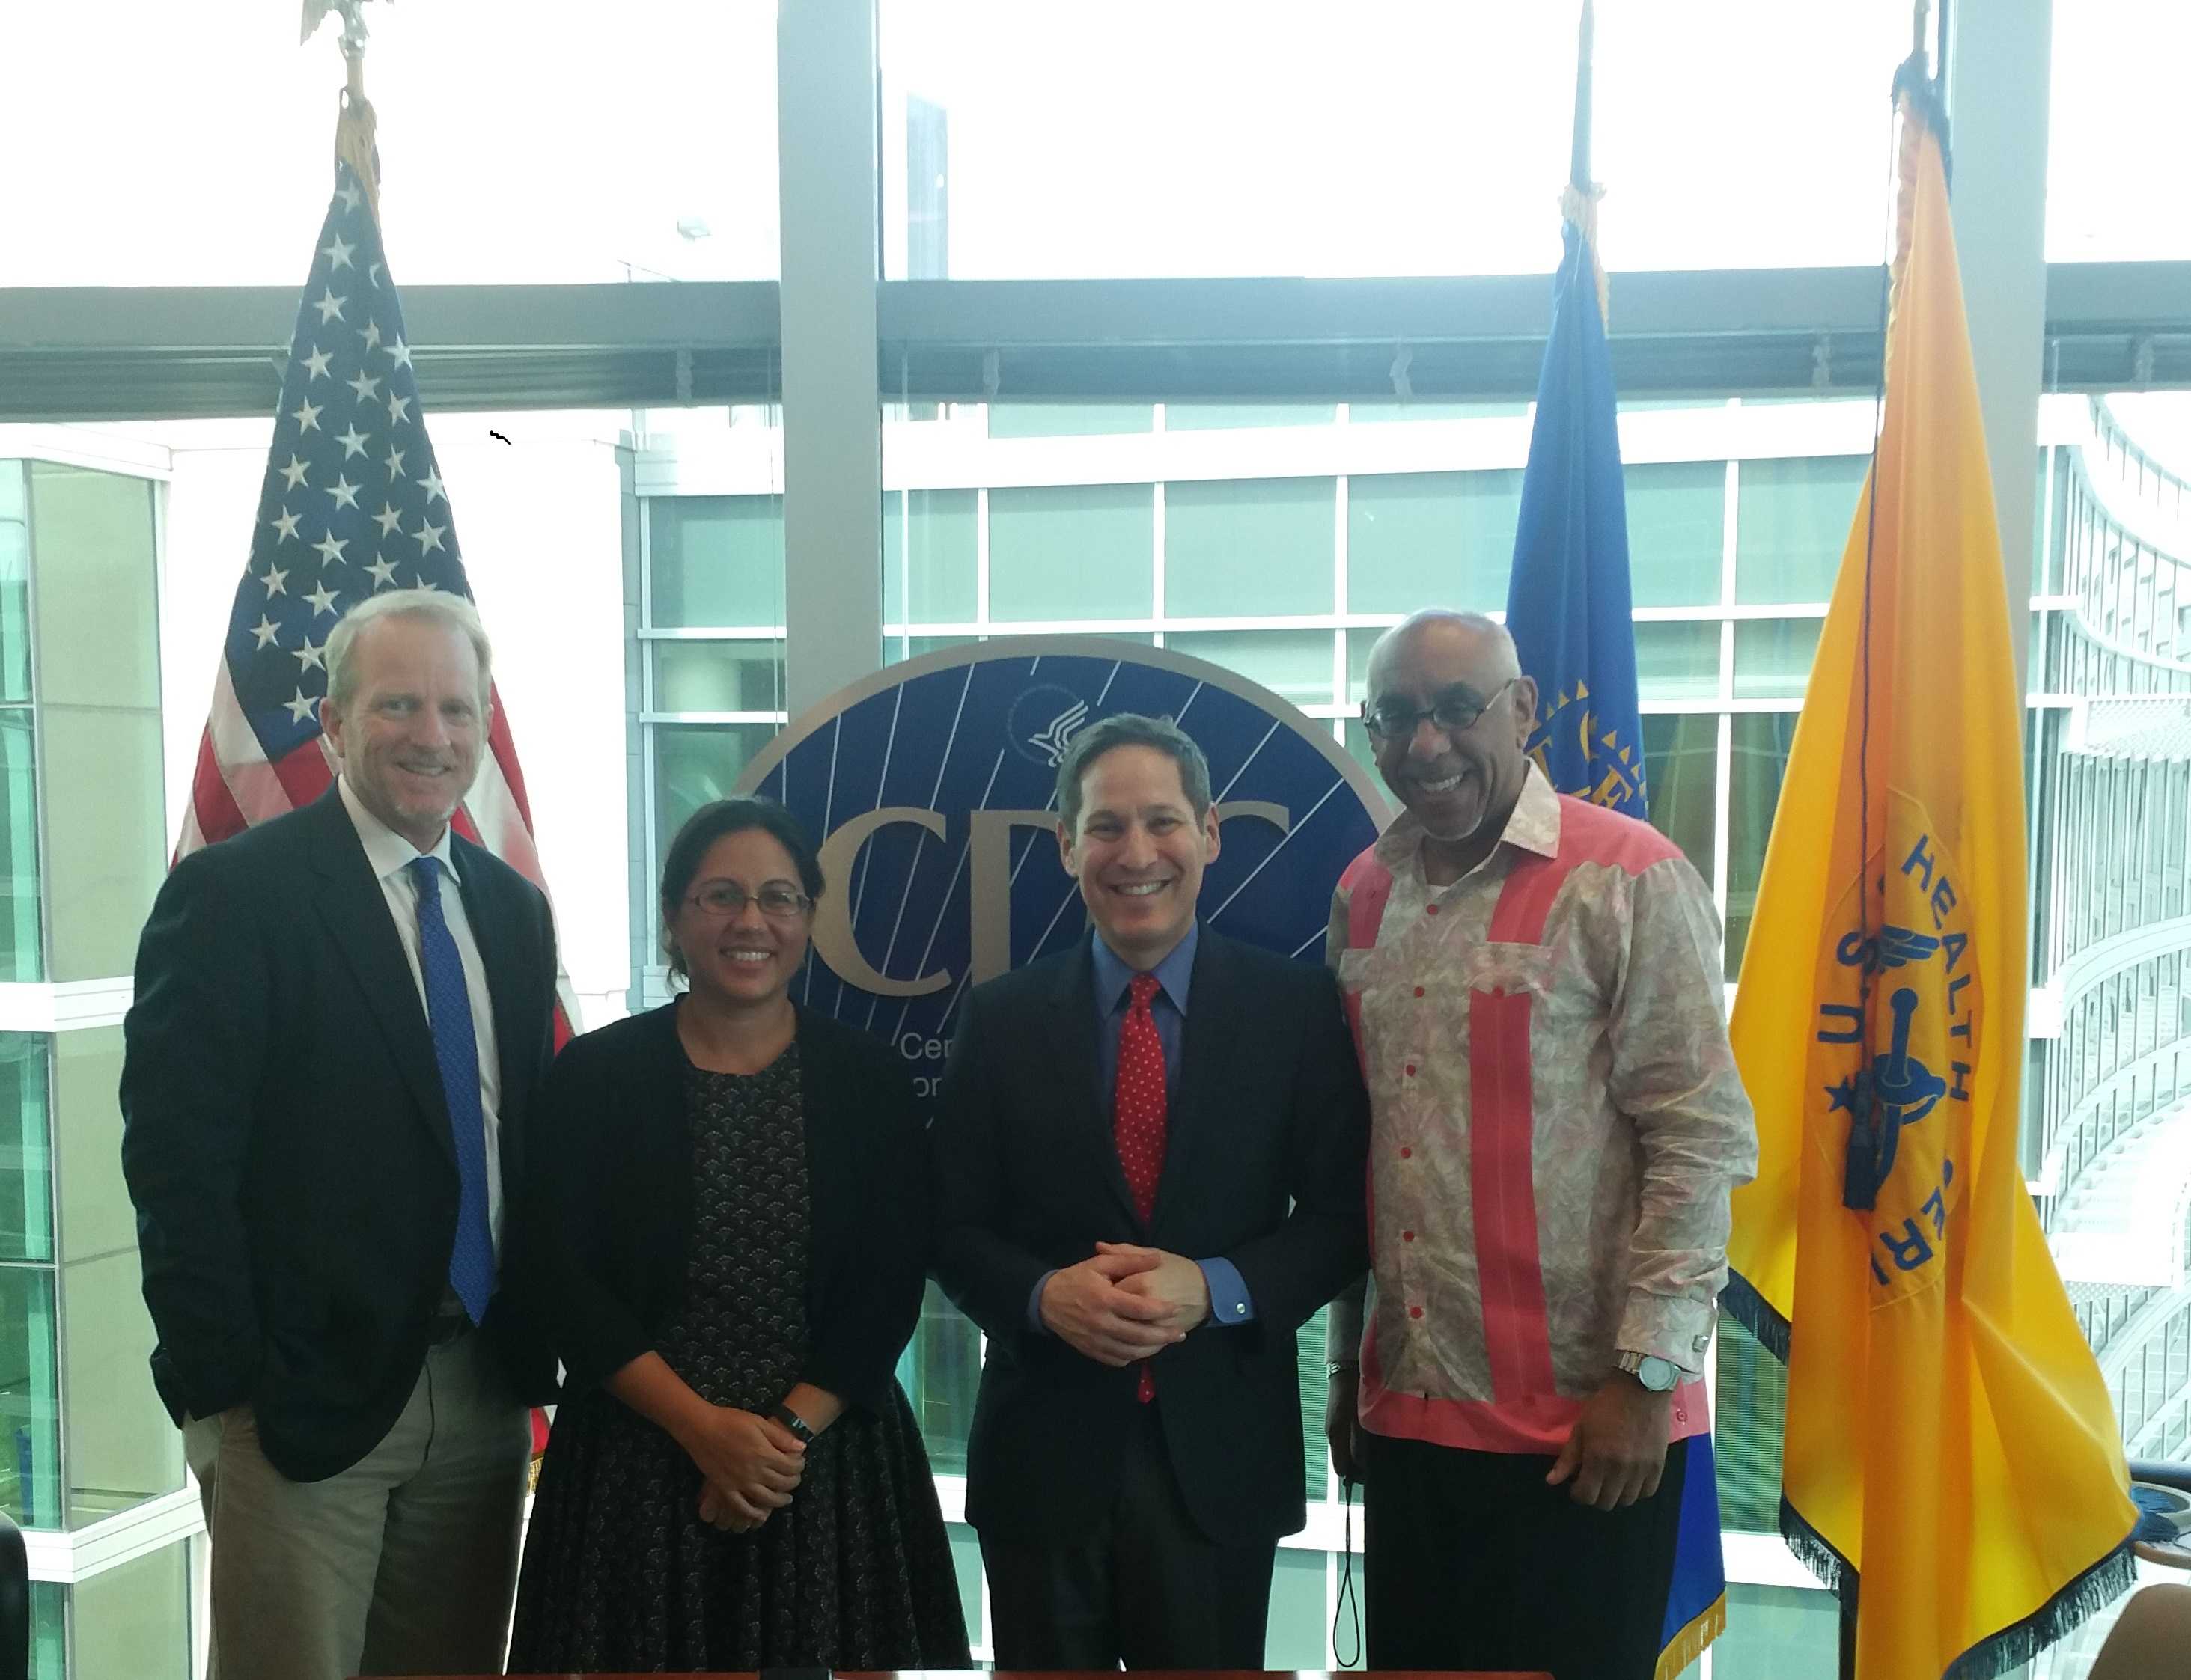    PIHOA Executive Director Emi Chutaro (2nd from left} and members of the OSTLTS Partnership Support Unit visit with CDC Director Dr. Tom Frieden (2nd from right) at CDC Headquarters 